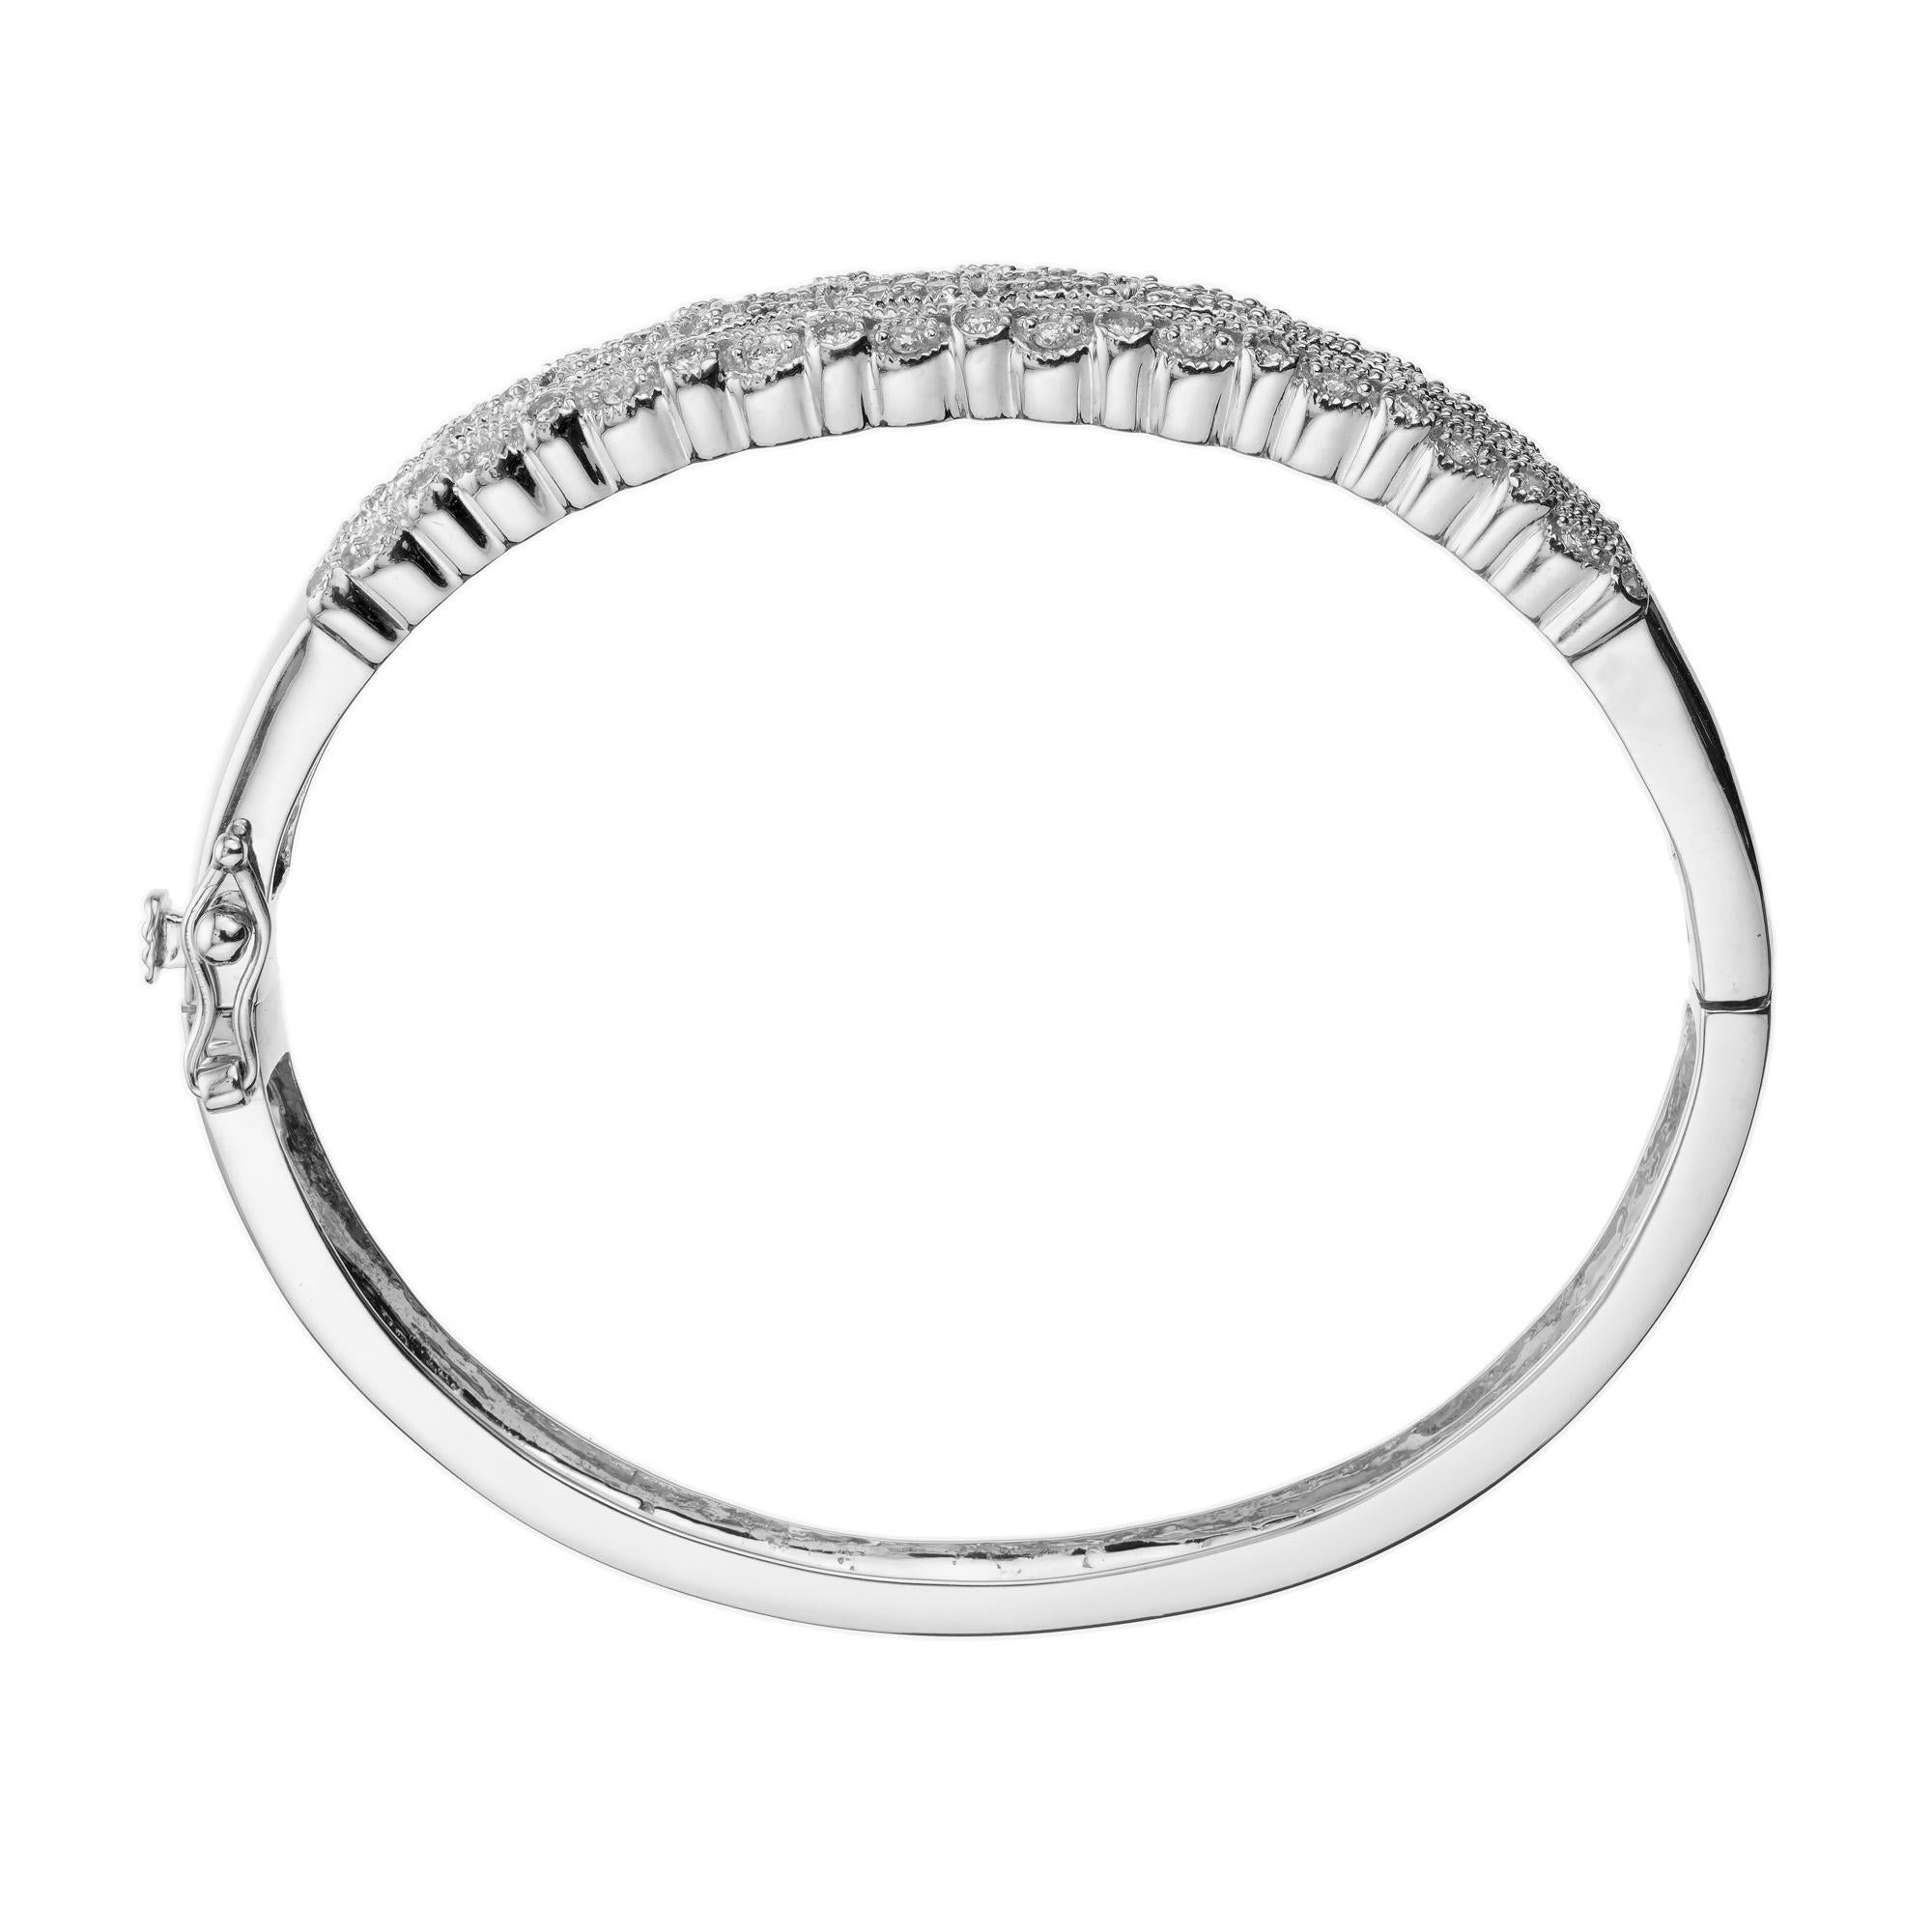 1.20 Carat Diamond White Gold Bangle Bracelet In Good Condition For Sale In Stamford, CT